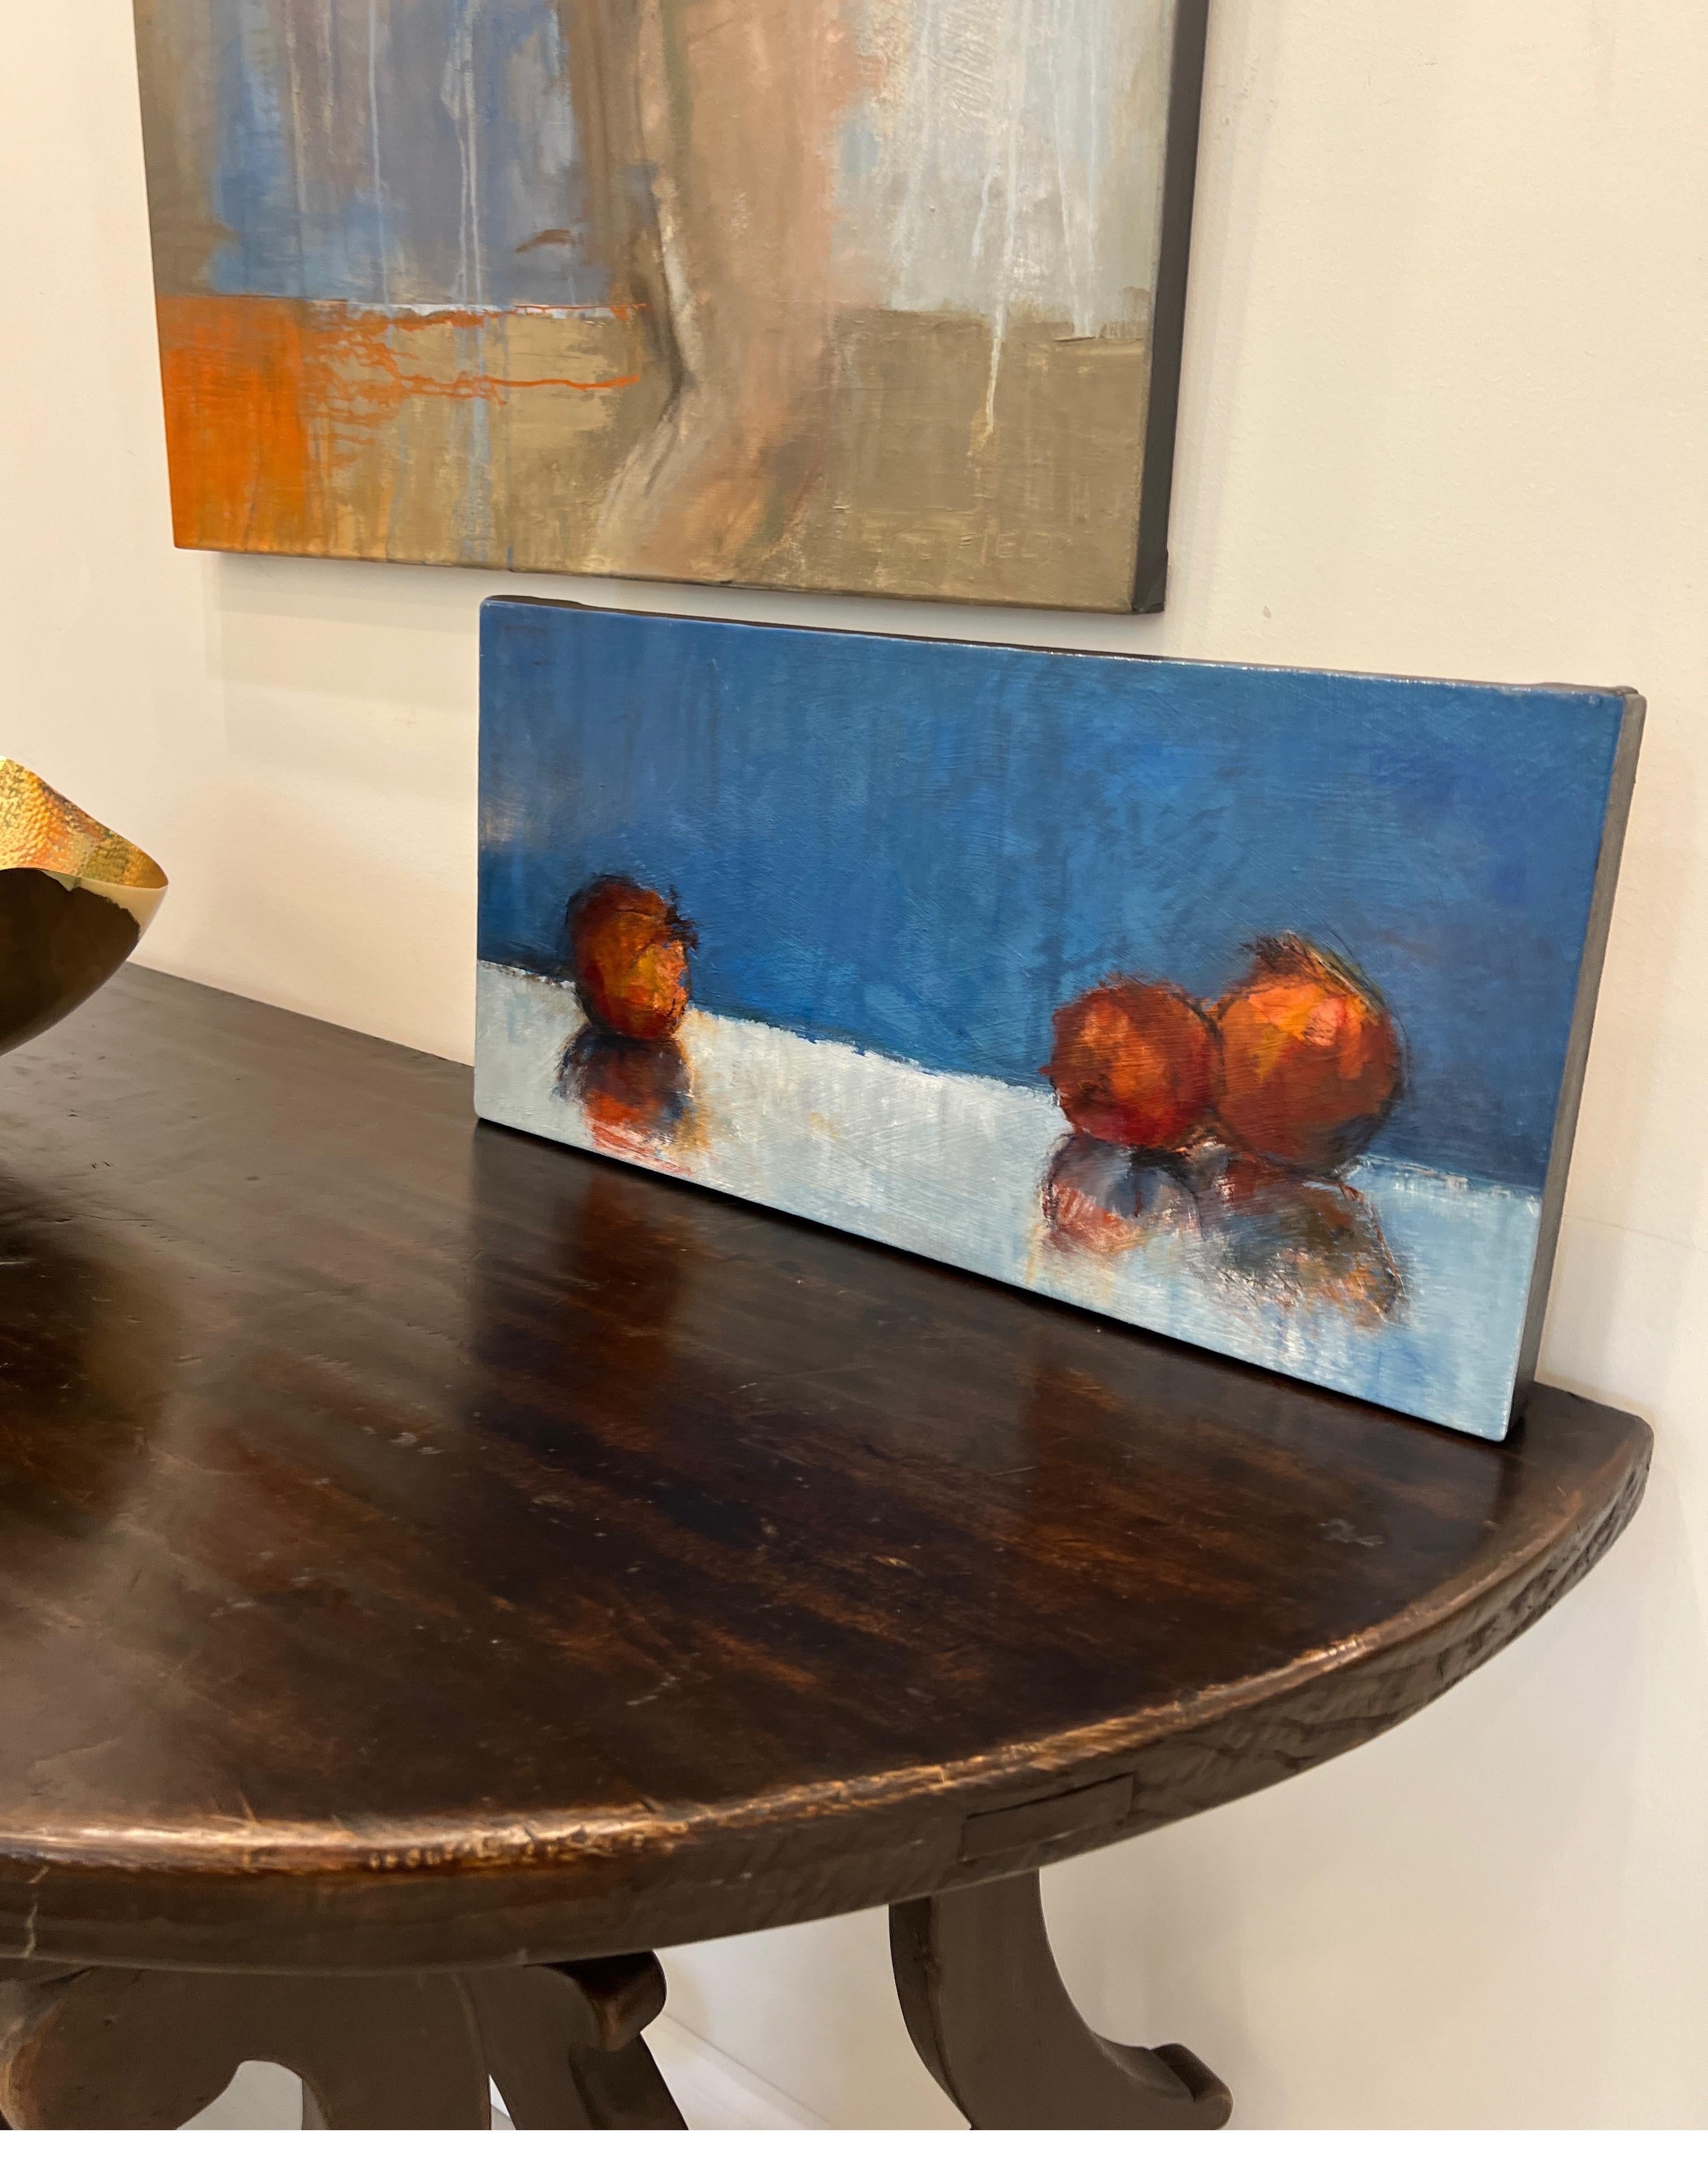 3 Poms by Sharon Hockfield, Contemporary Still Life Painting Oil on Canvas 5